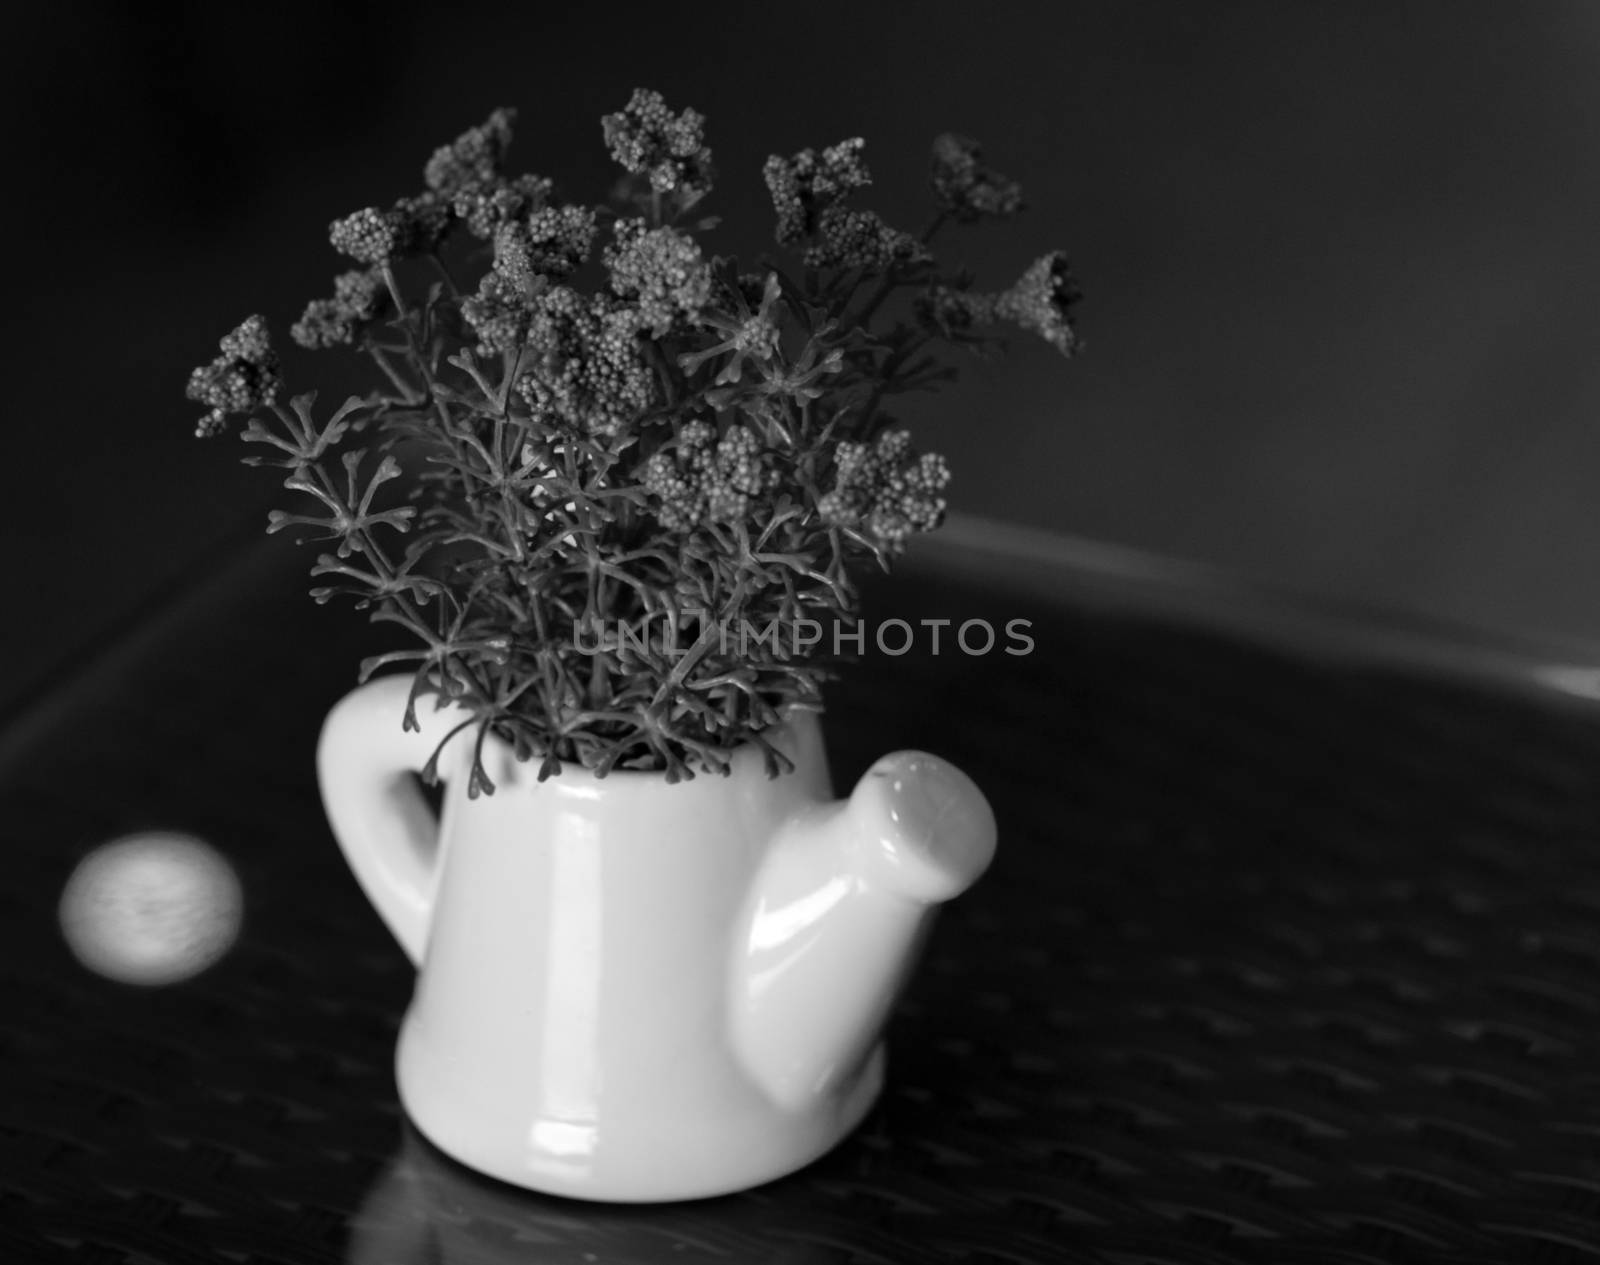 BLACK AND WHITE PHOTO OF SMALL PLANT POTTED IN WATERING POT ON TABLETOP